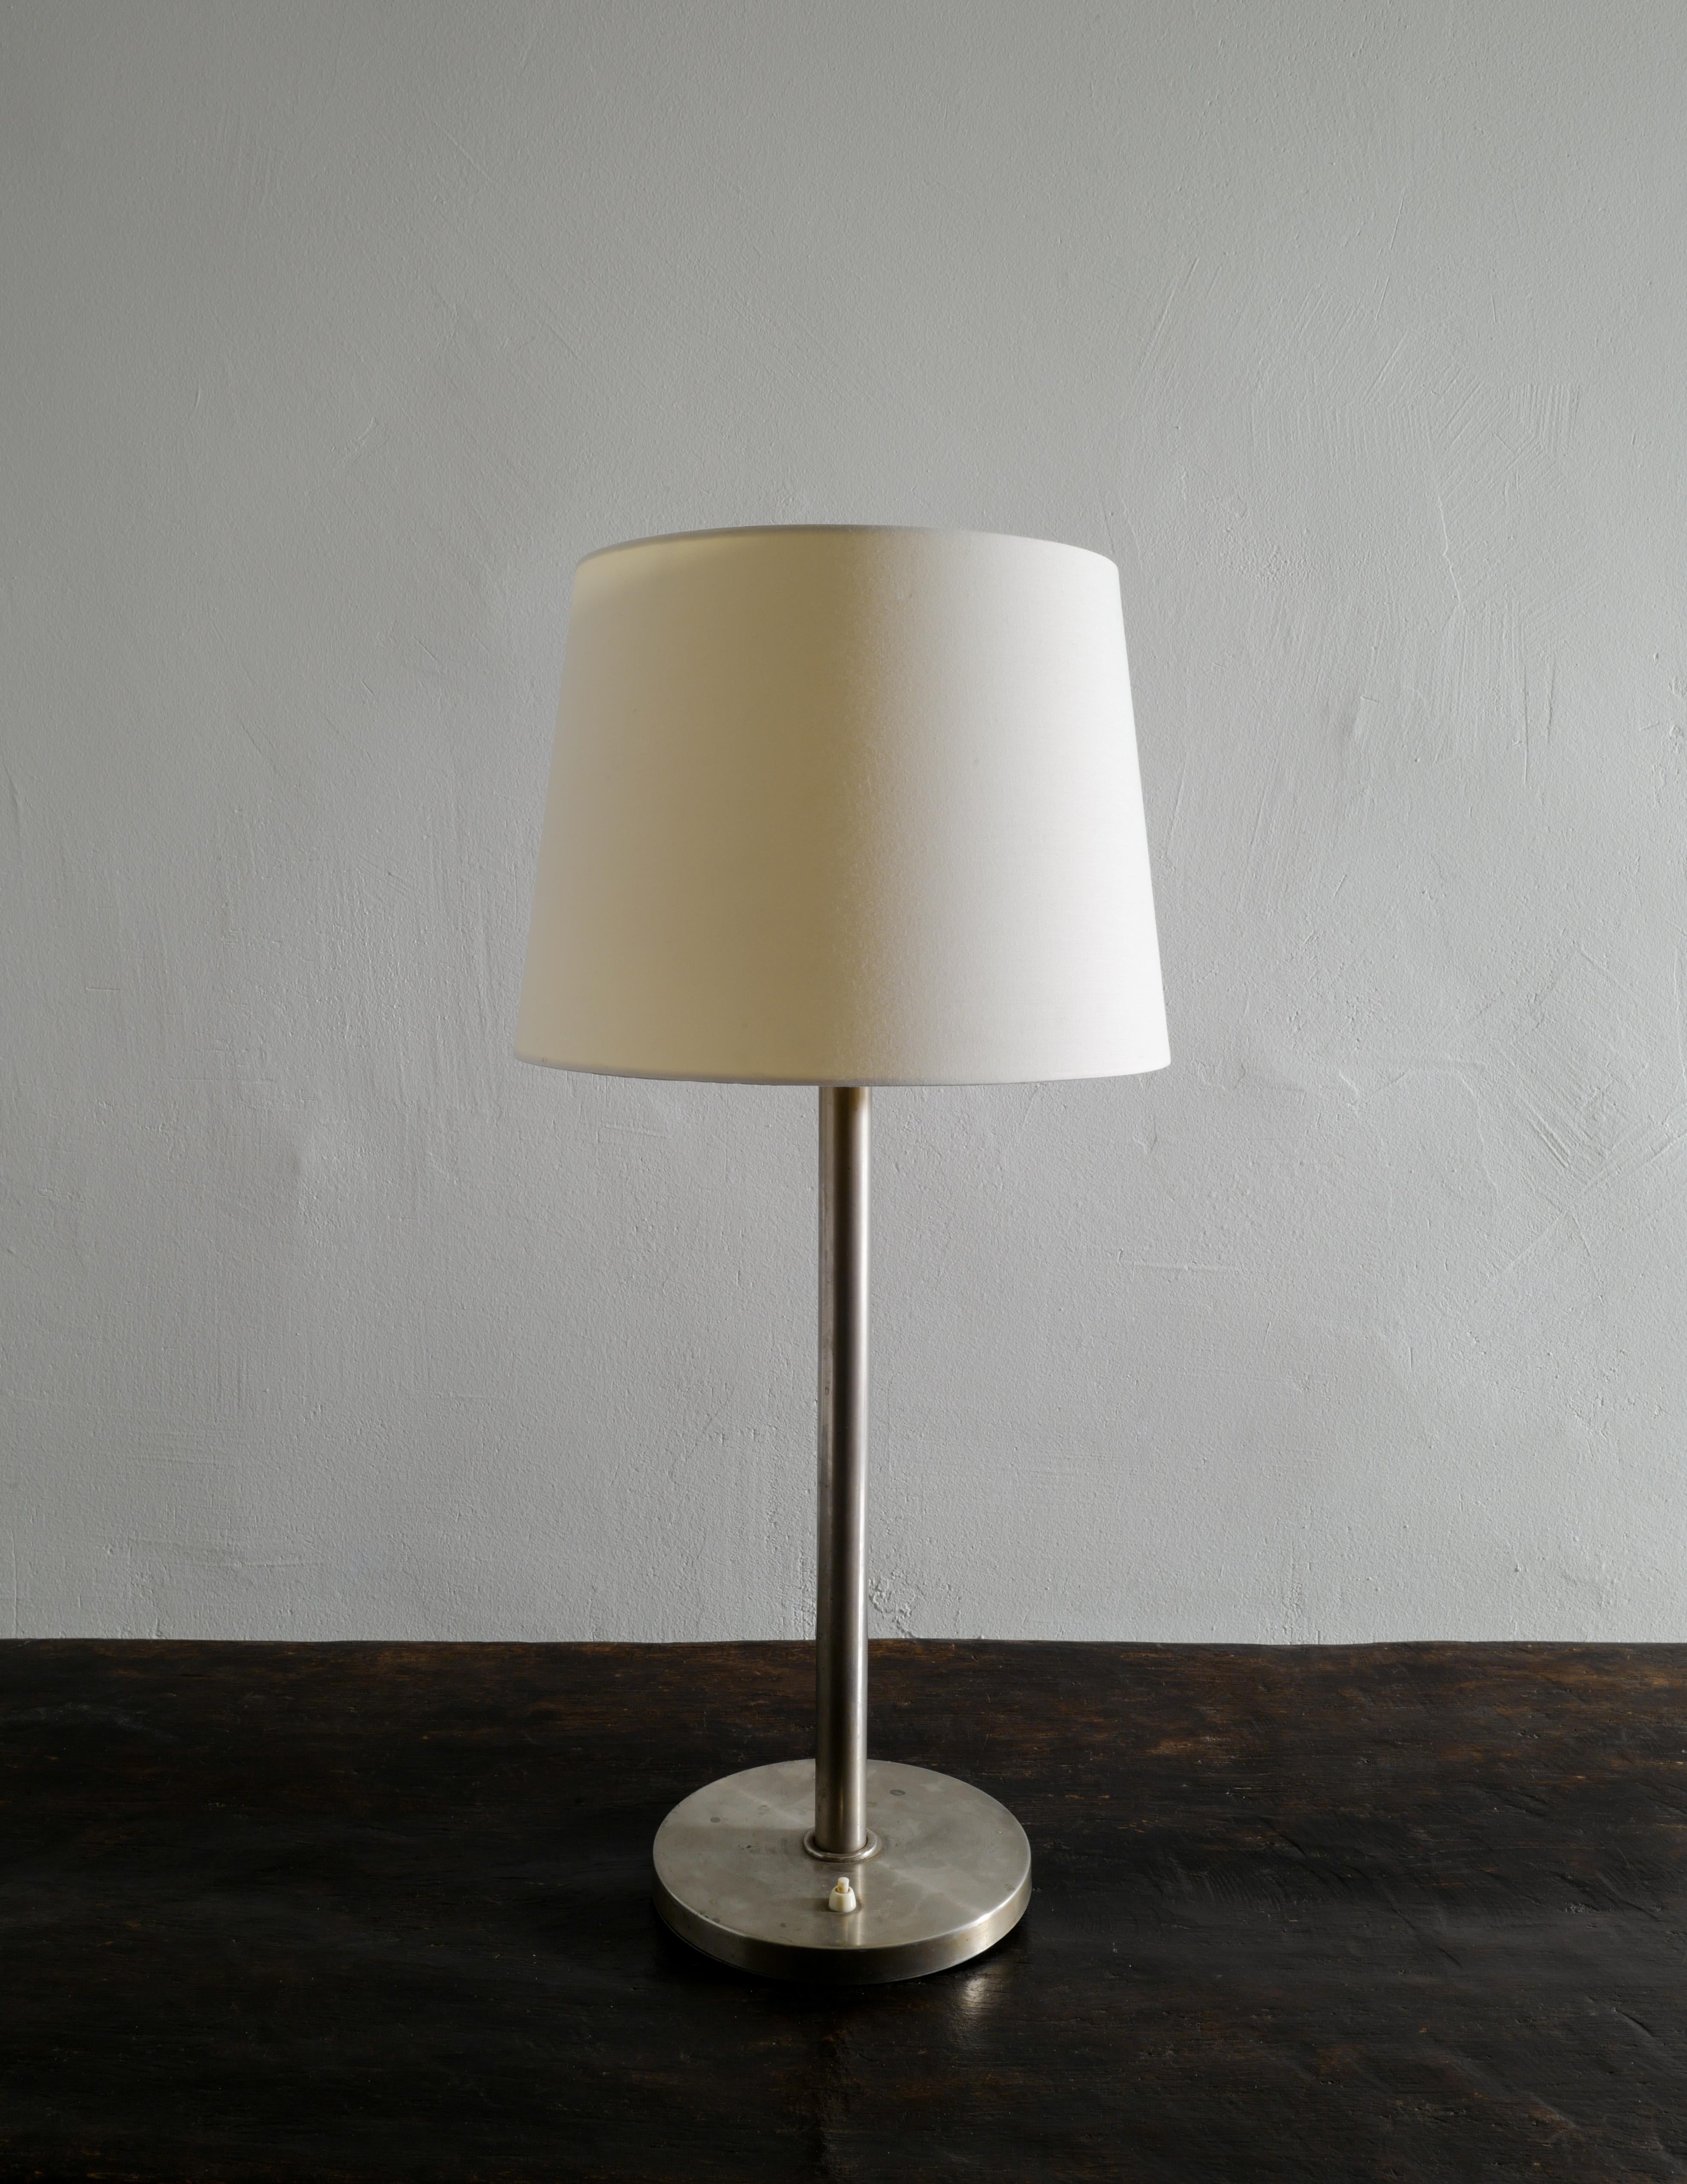 Rare mid century table lamp in brass produced by Böhlmarks, Sweden during the 1960s. In good vintage condition with beautiful patina from age and use. 
Shade is not included in the purchase. 

Dimensions: H: 54 cm (without the shade) Diameter of